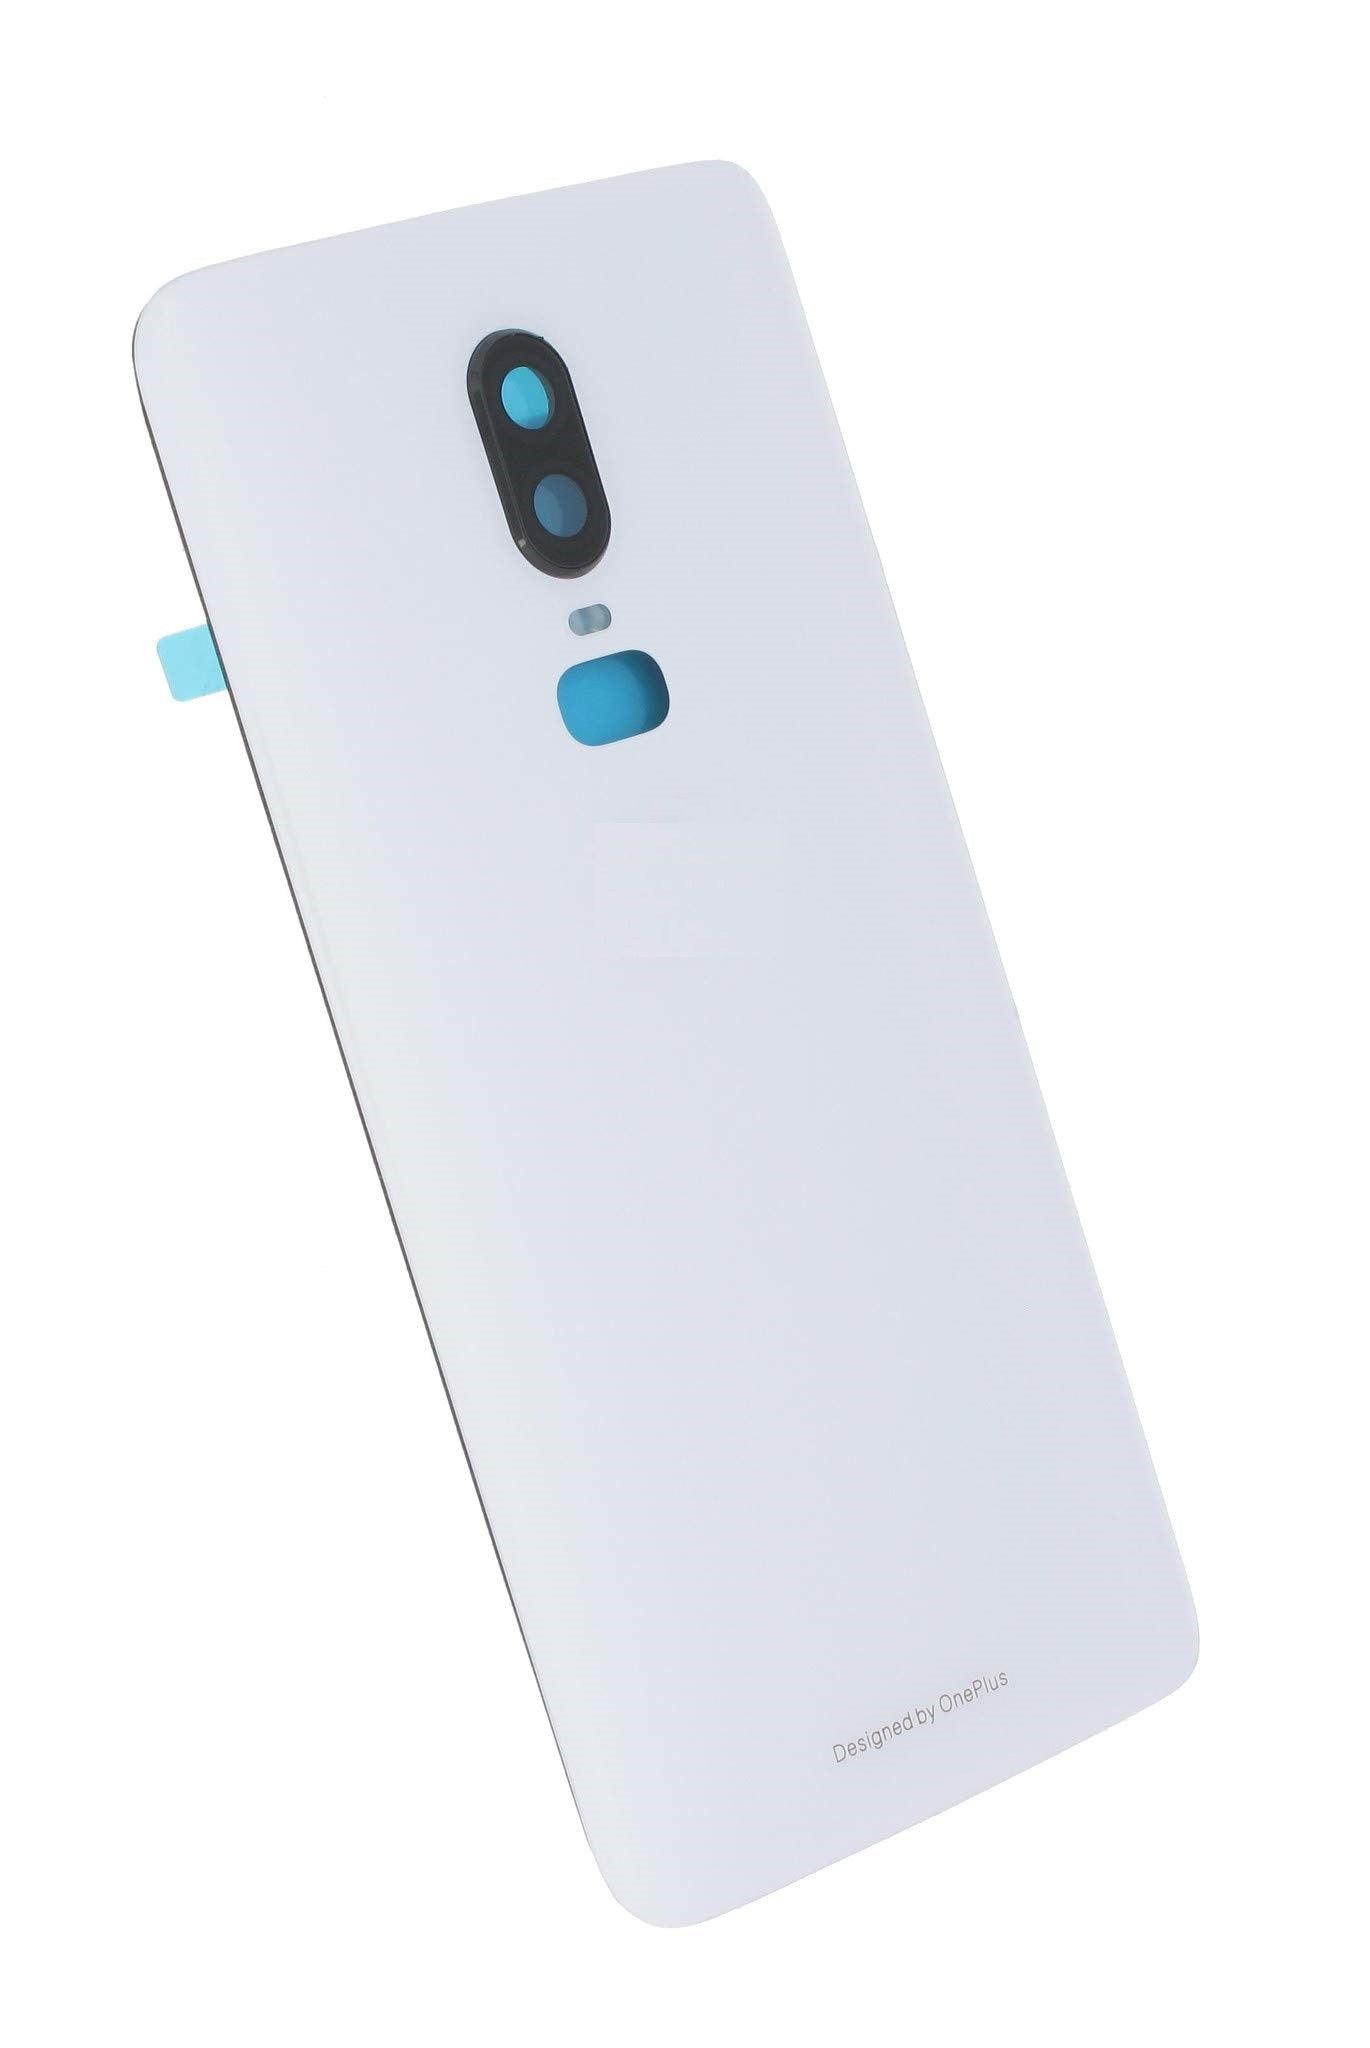 Back Glass Panel for Oneplus 6 White with Camera Lens Module and Self Adhesive Tape